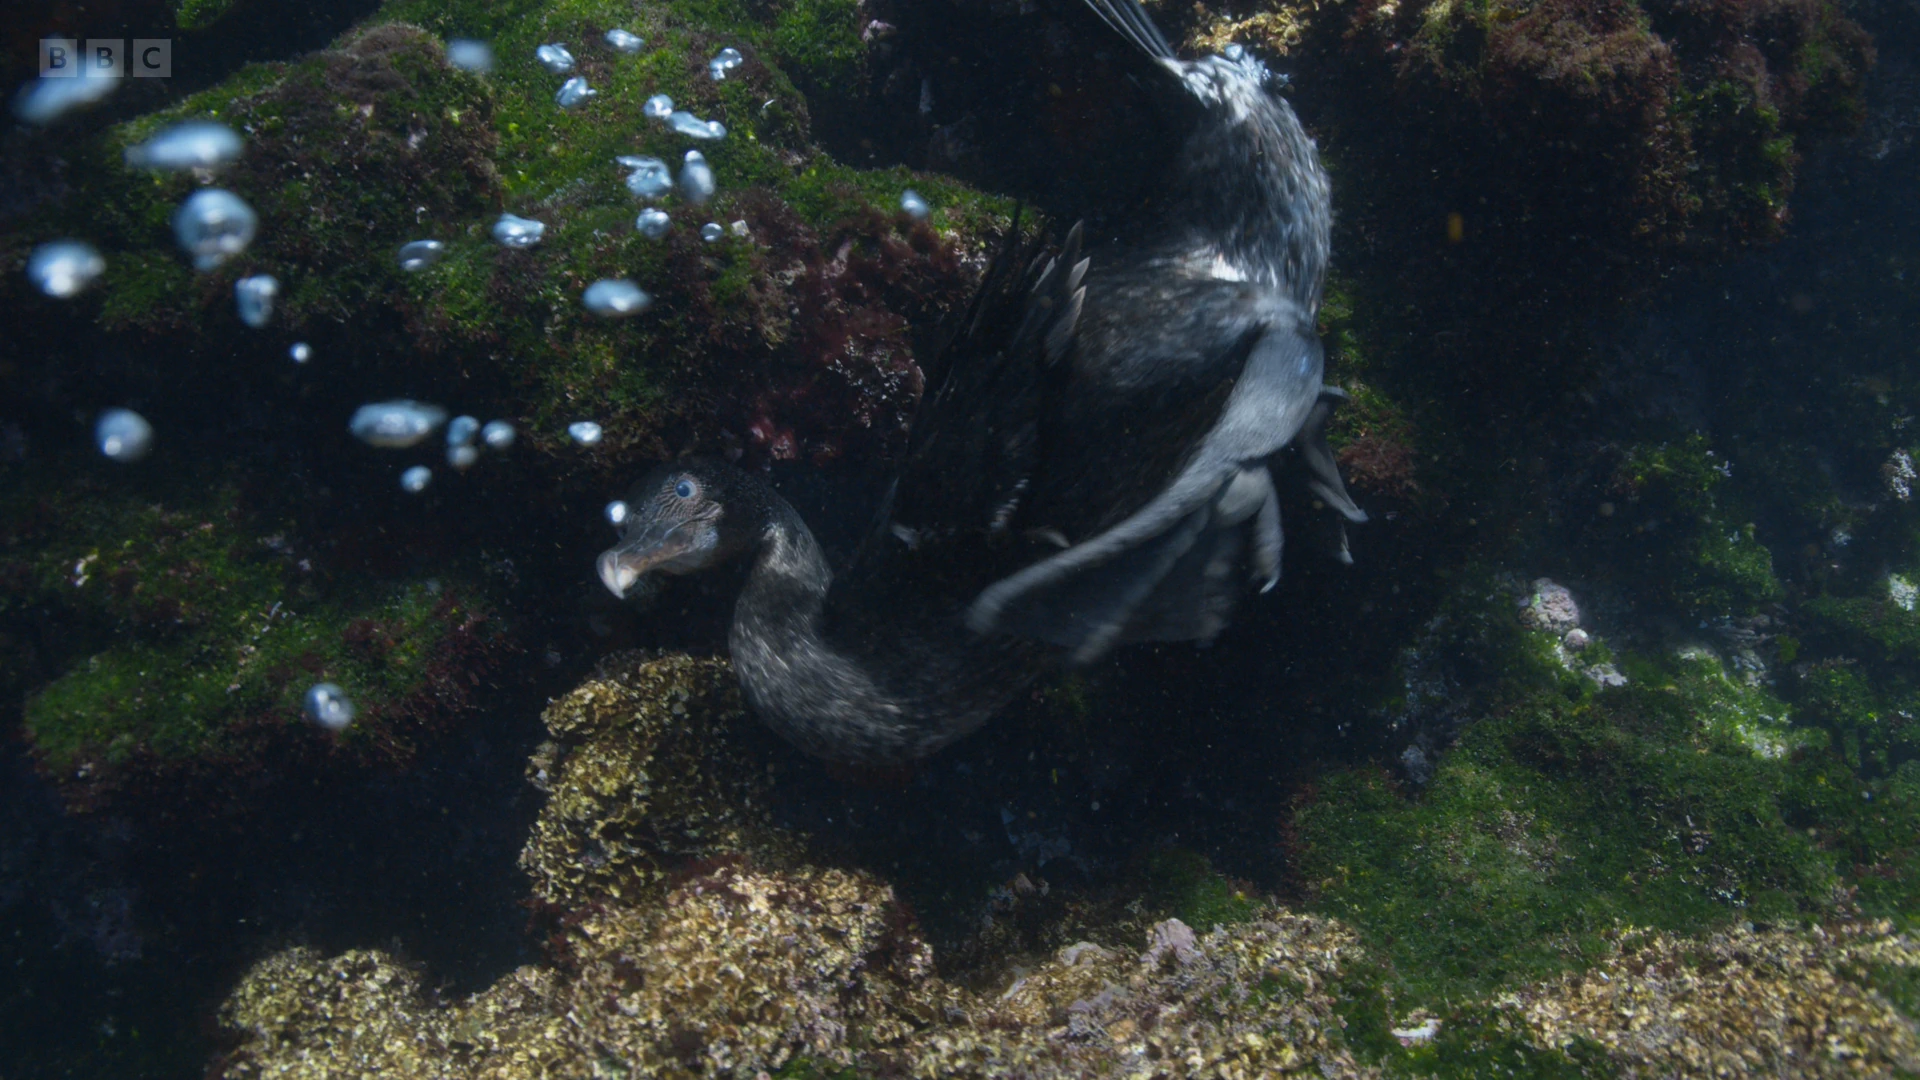 Flightless cormorant (Nannopterum harrisi) as shown in A Perfect Planet - Oceans